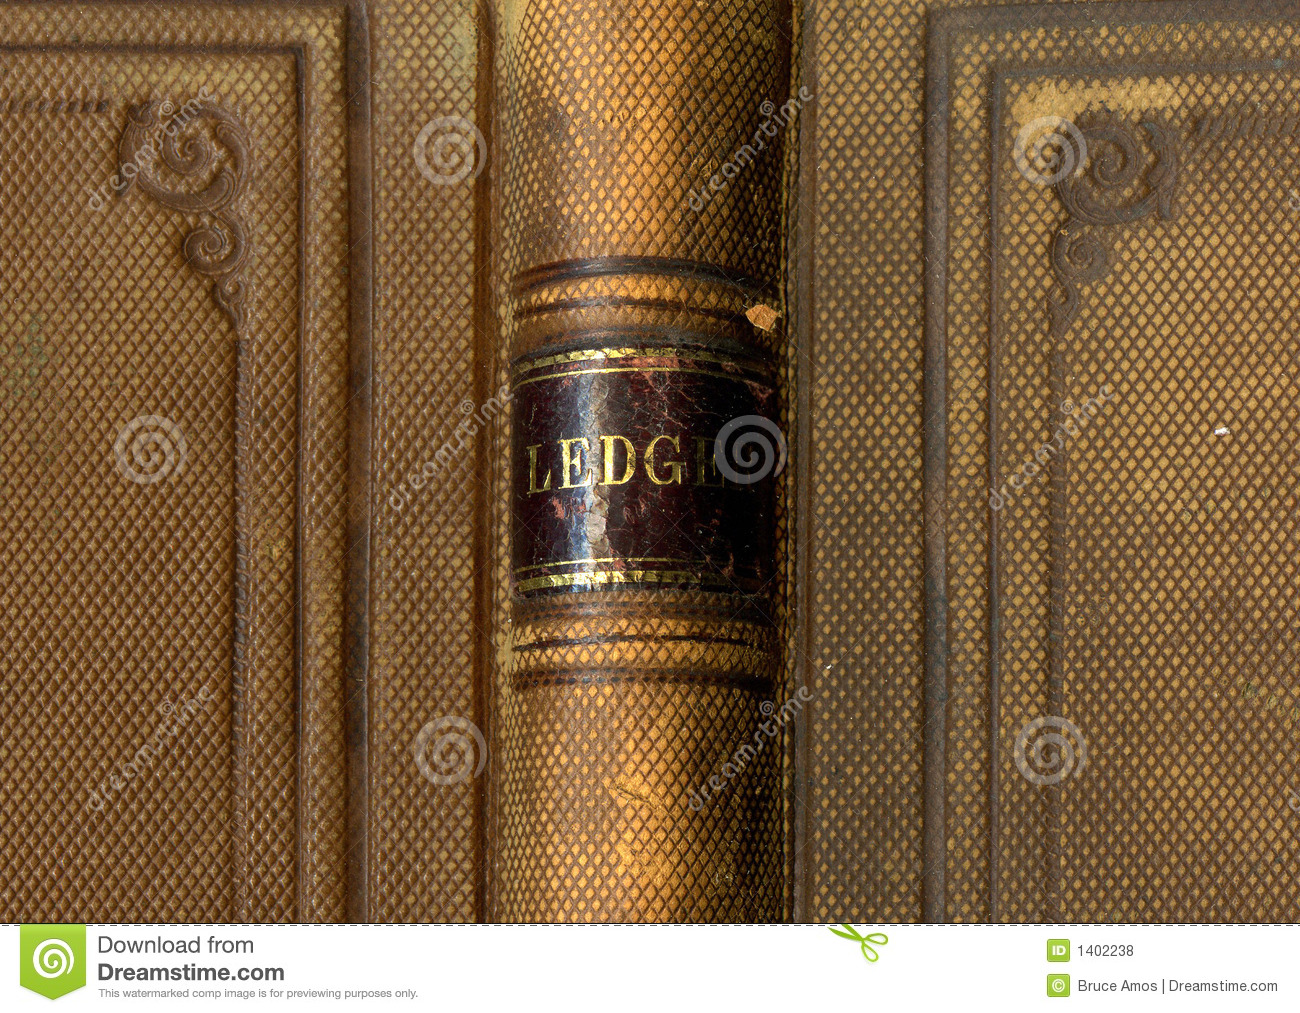 Old Book Cover Clipart Antique Ledger Book Cover With